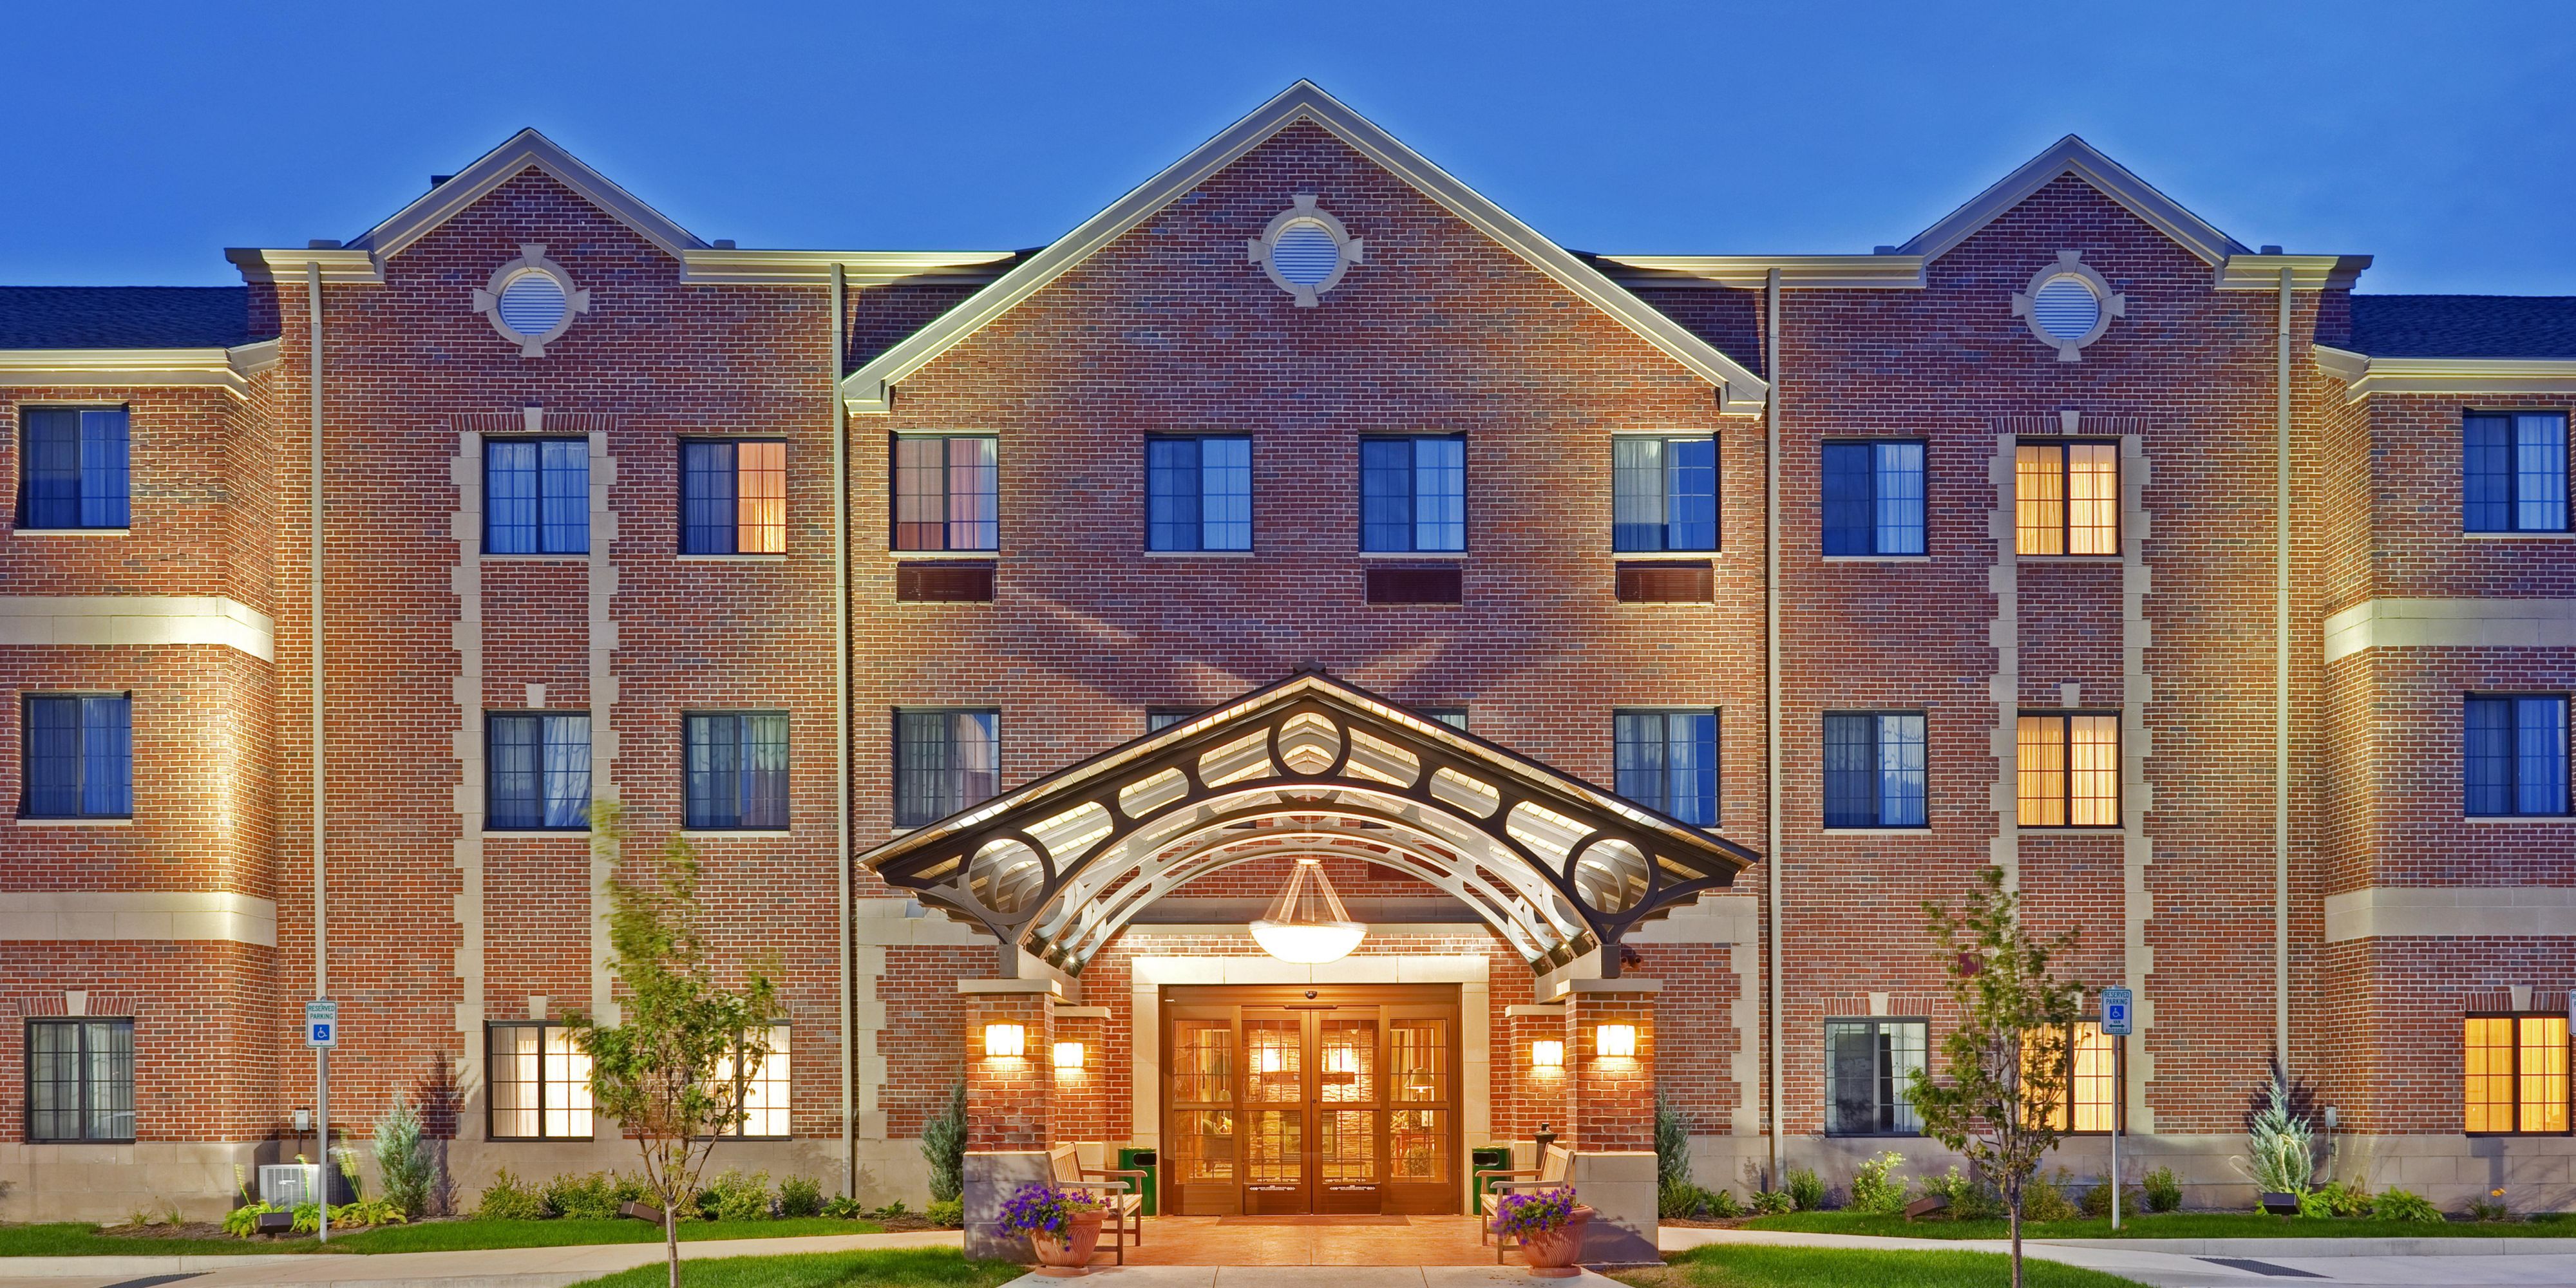 Staybridge Suites Indianapolis-Carmel Map & Driving Directions | Parking Options for Staybridge ...